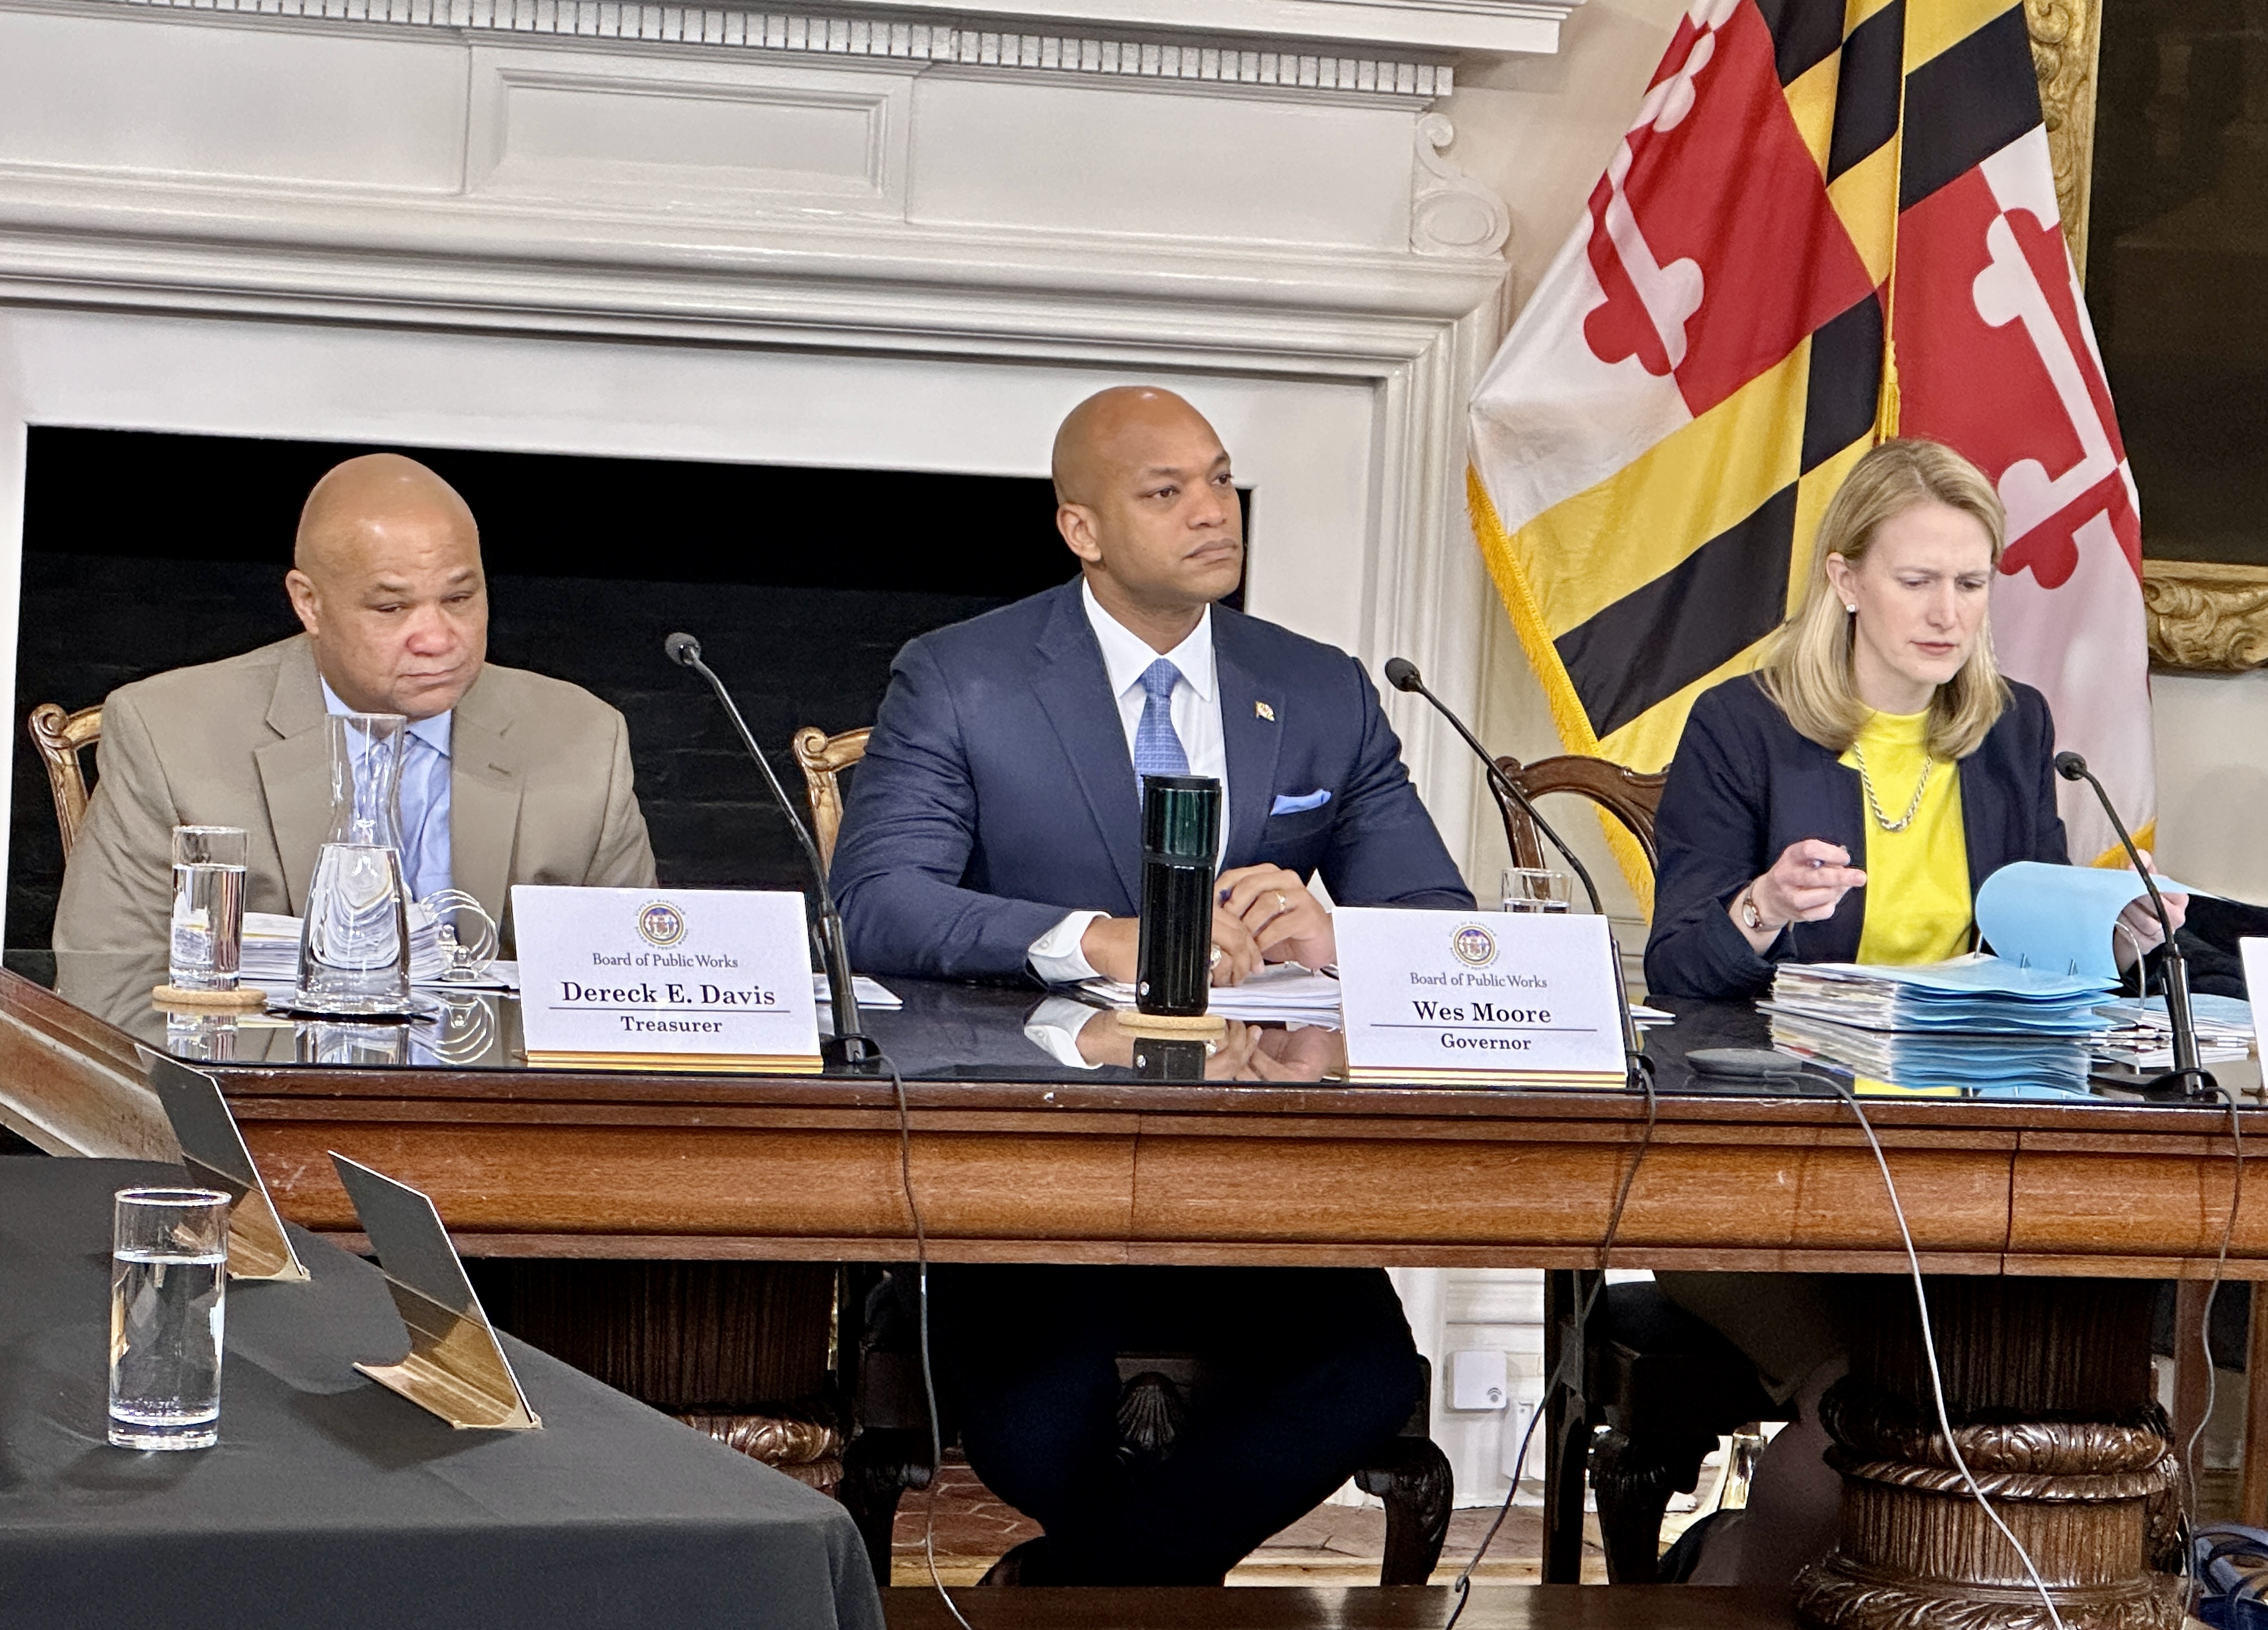 From left, State Treasurer Dereck Davis, Gov. Wes Moore and Comptroller Brooke Lierman listen to a presentation at a meeting of the Board of Public Works on March 13, 2024. (Sapna Bansil/Capital News Service)